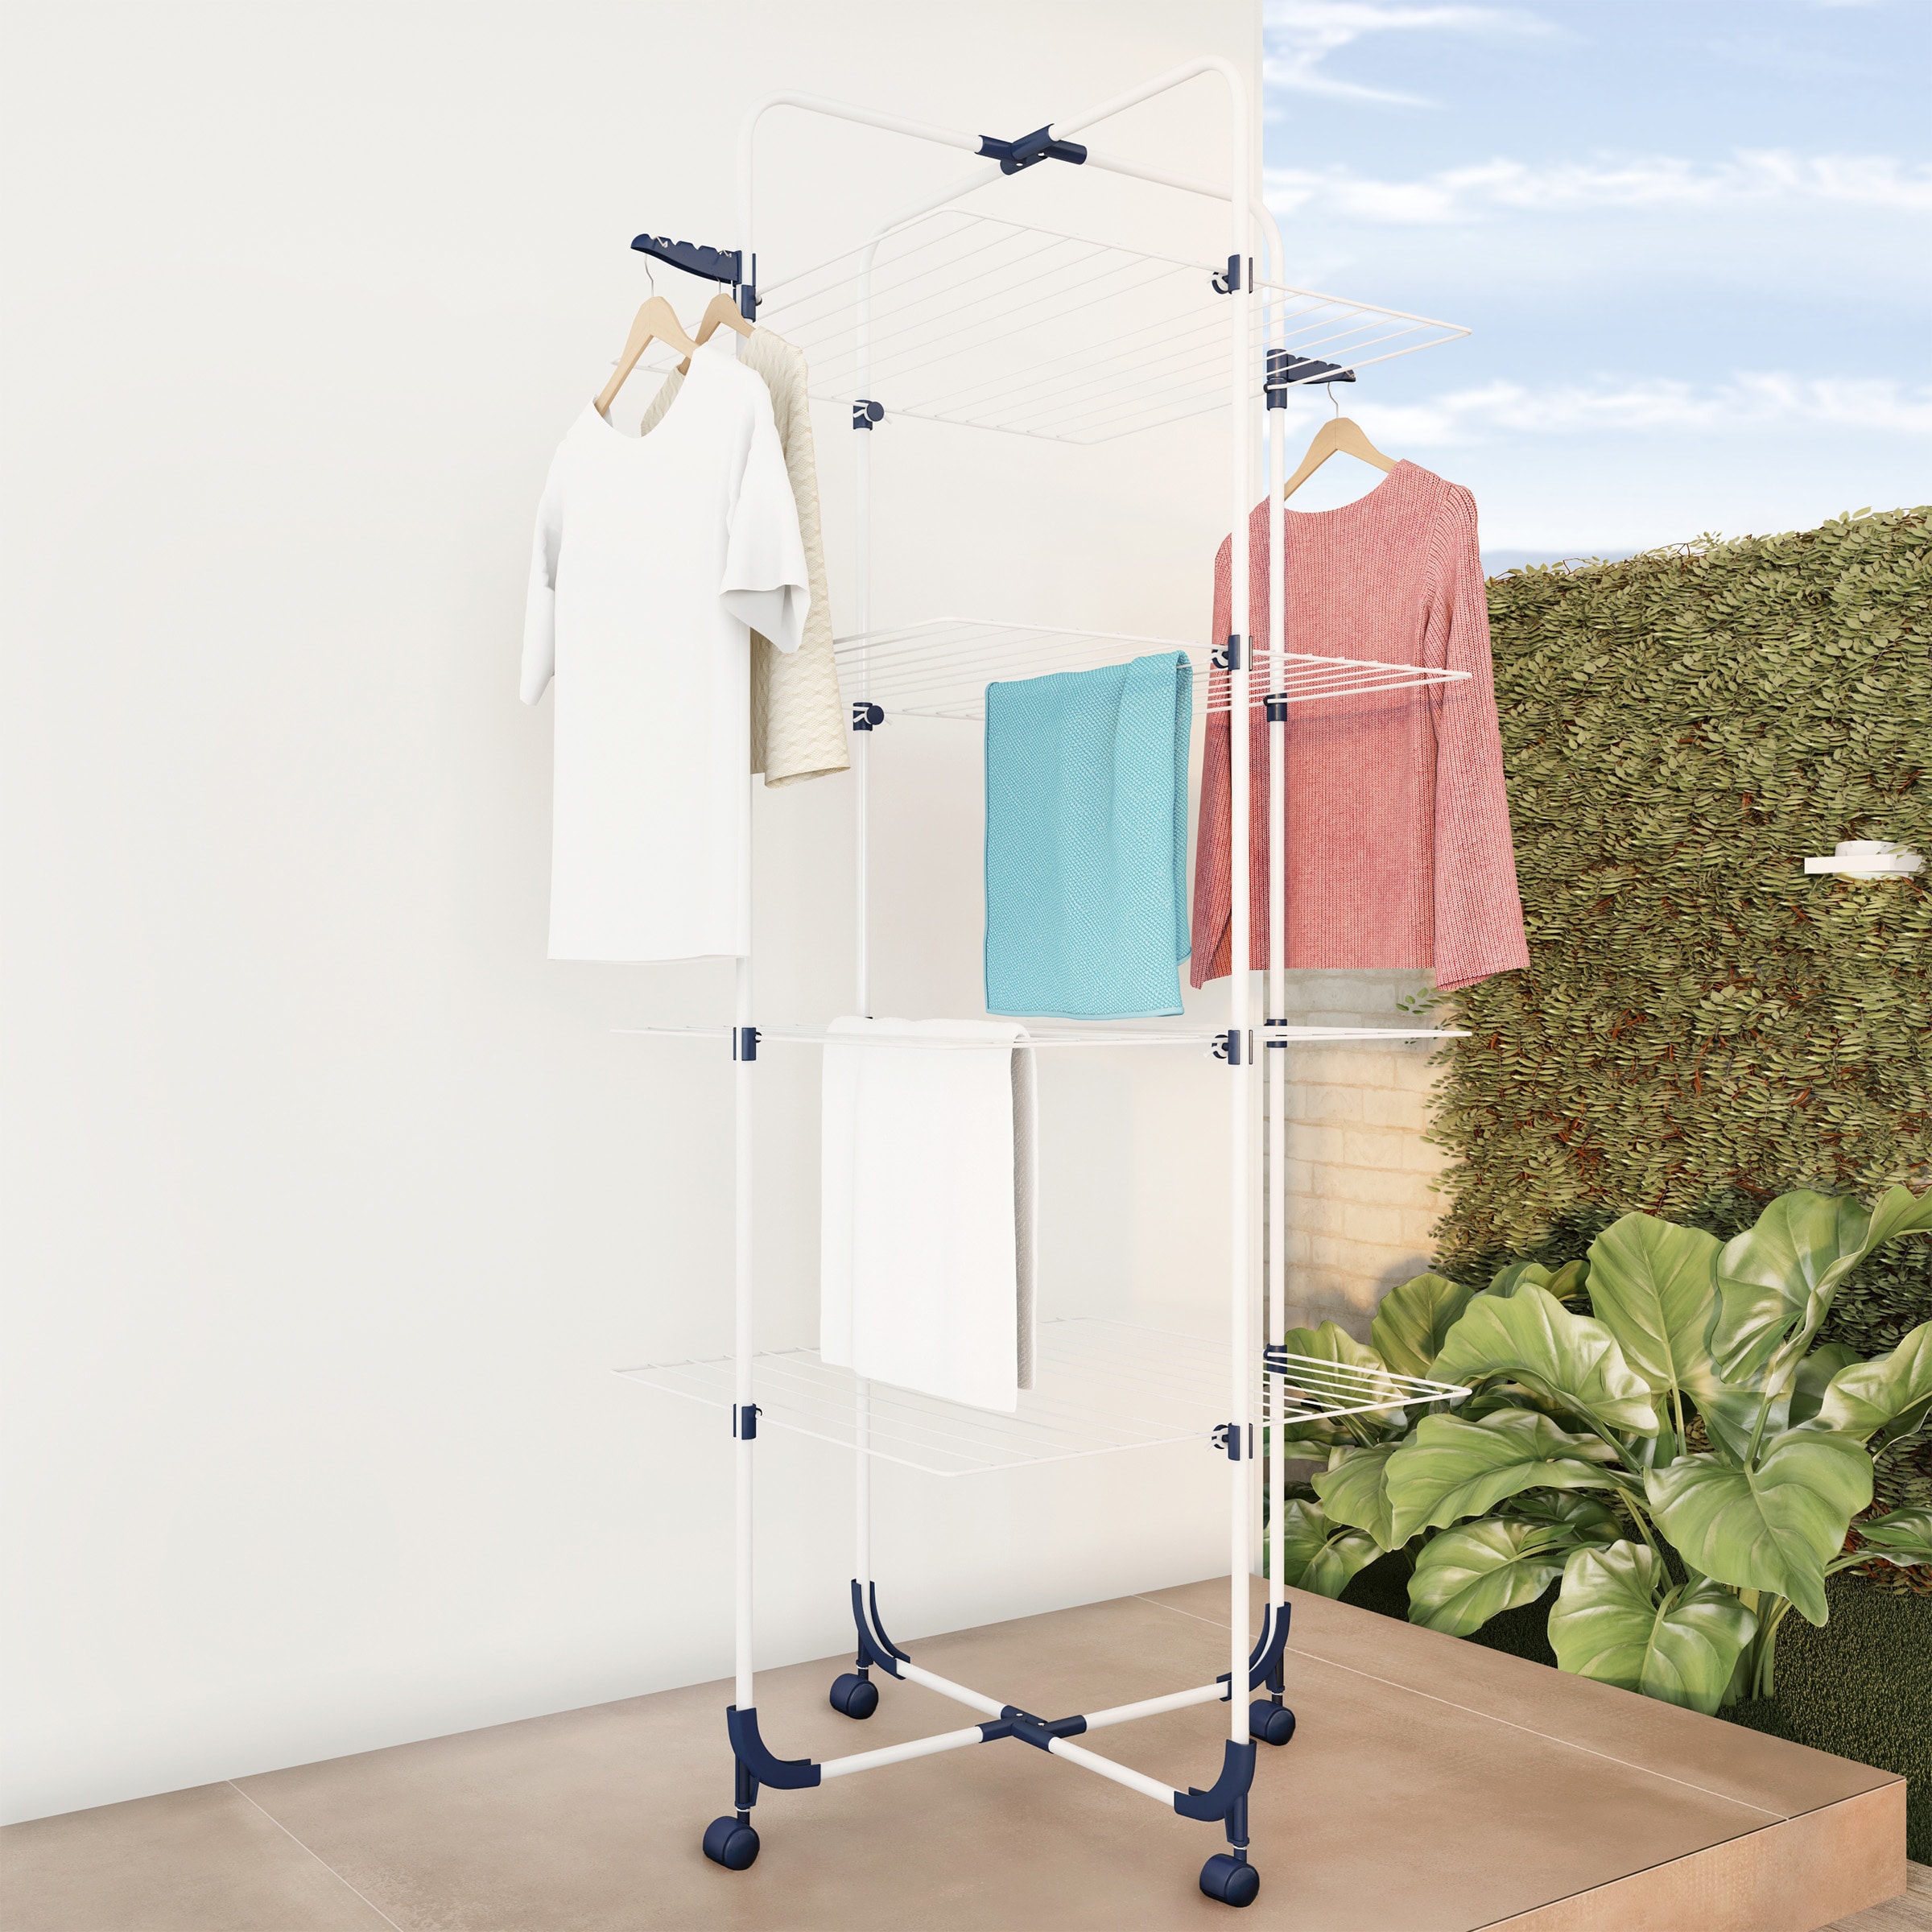  VOSAREA 1Pc Drying Rack Hanging Dry Net Clothes